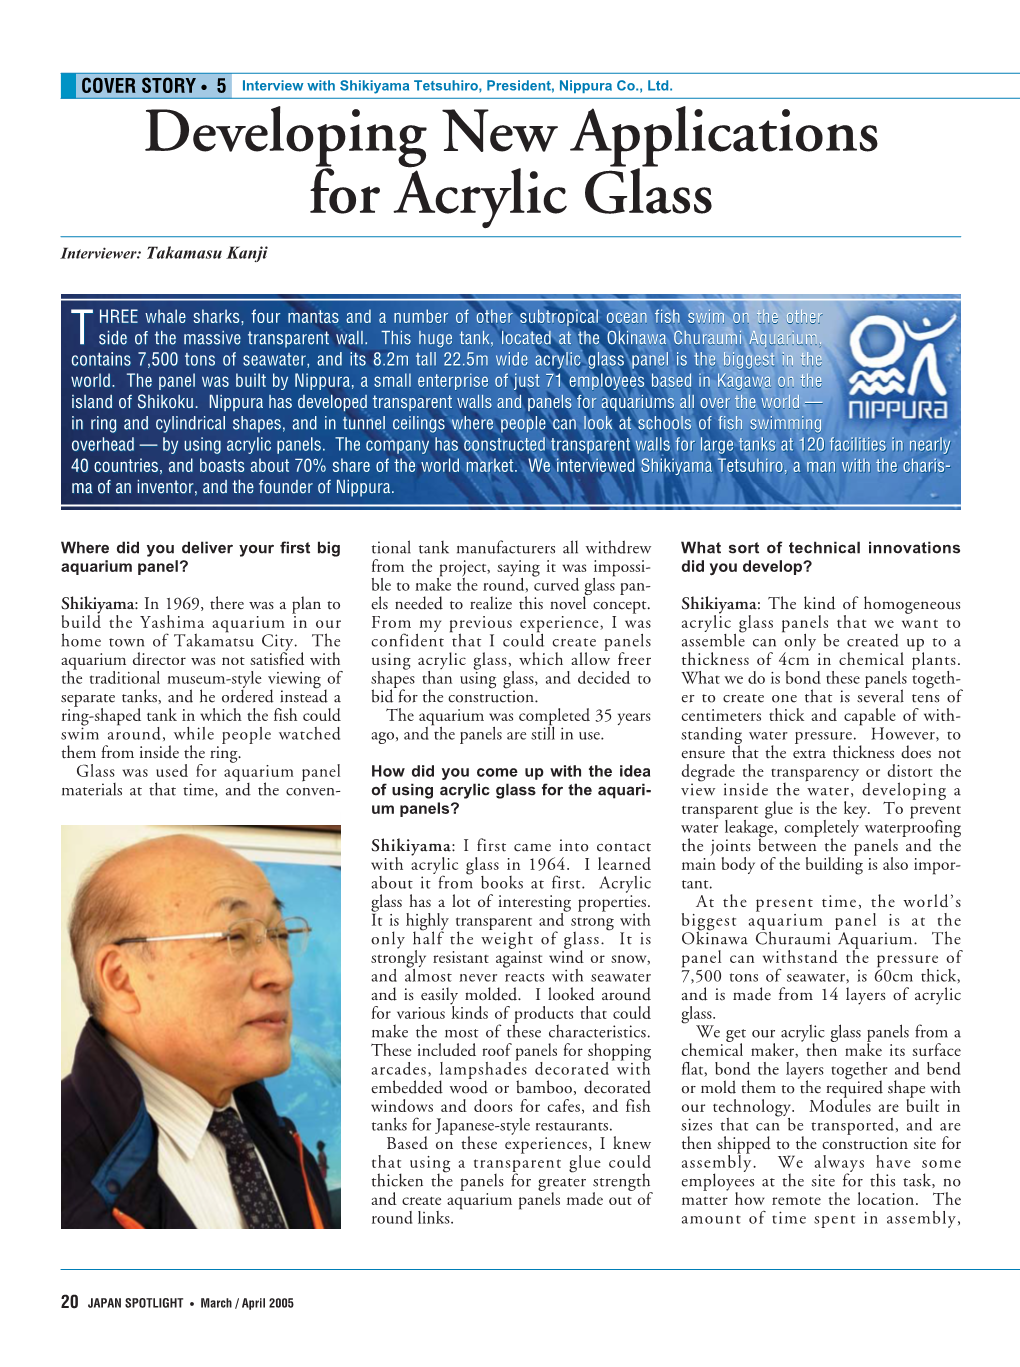 Developing New Applications for Acrylic Glass